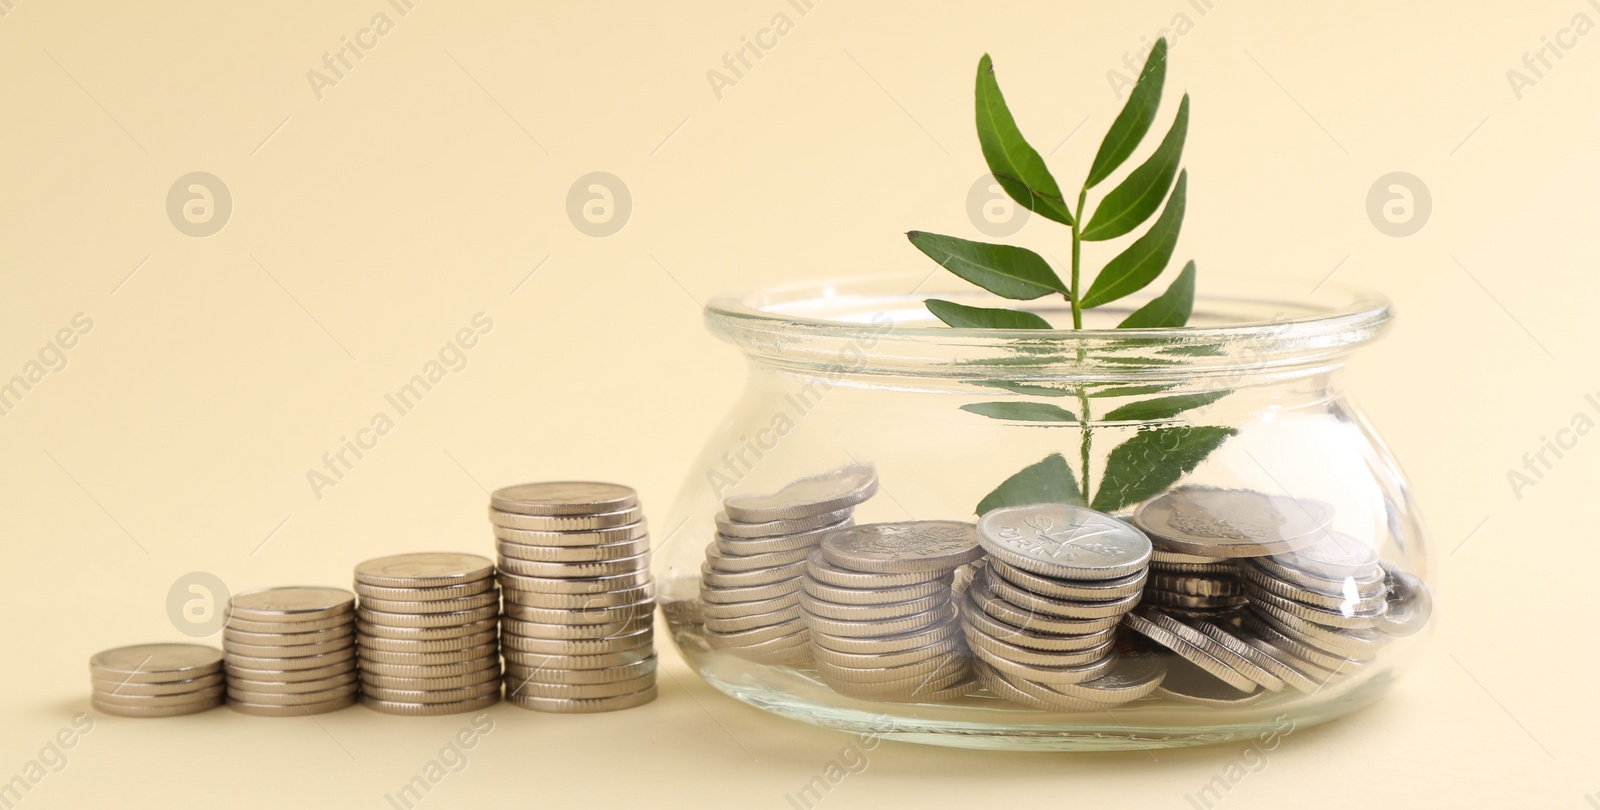 Photo of Financial savings. Coins, twig and glass jar on beige background